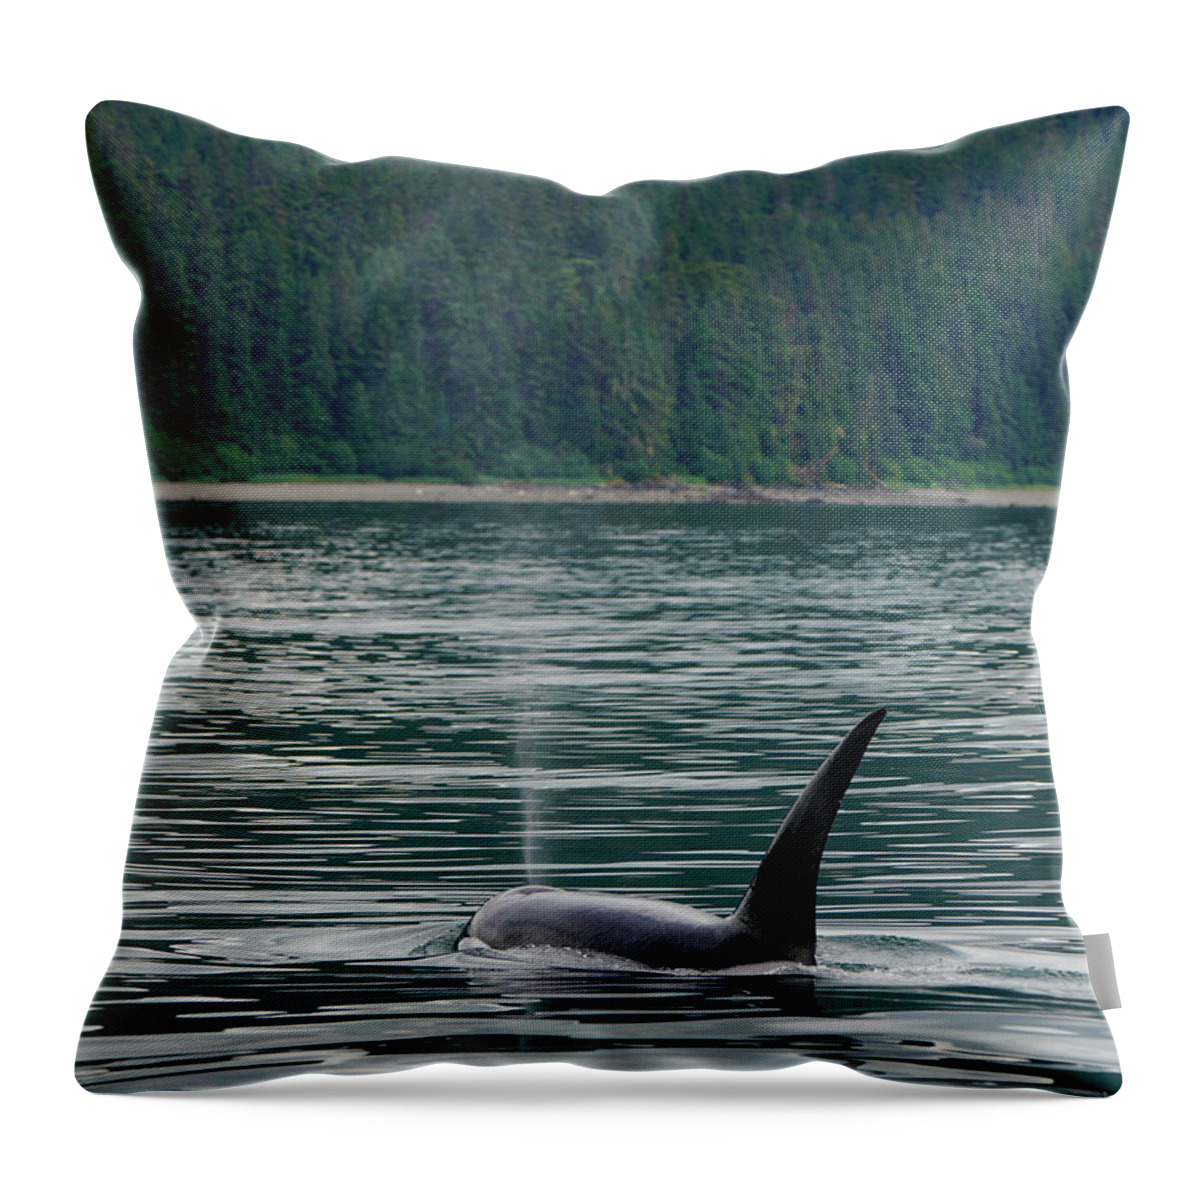 00584702 Throw Pillow featuring the photograph Surfacing Orca In Inside Passage #1 by Hiroya Minakuchi